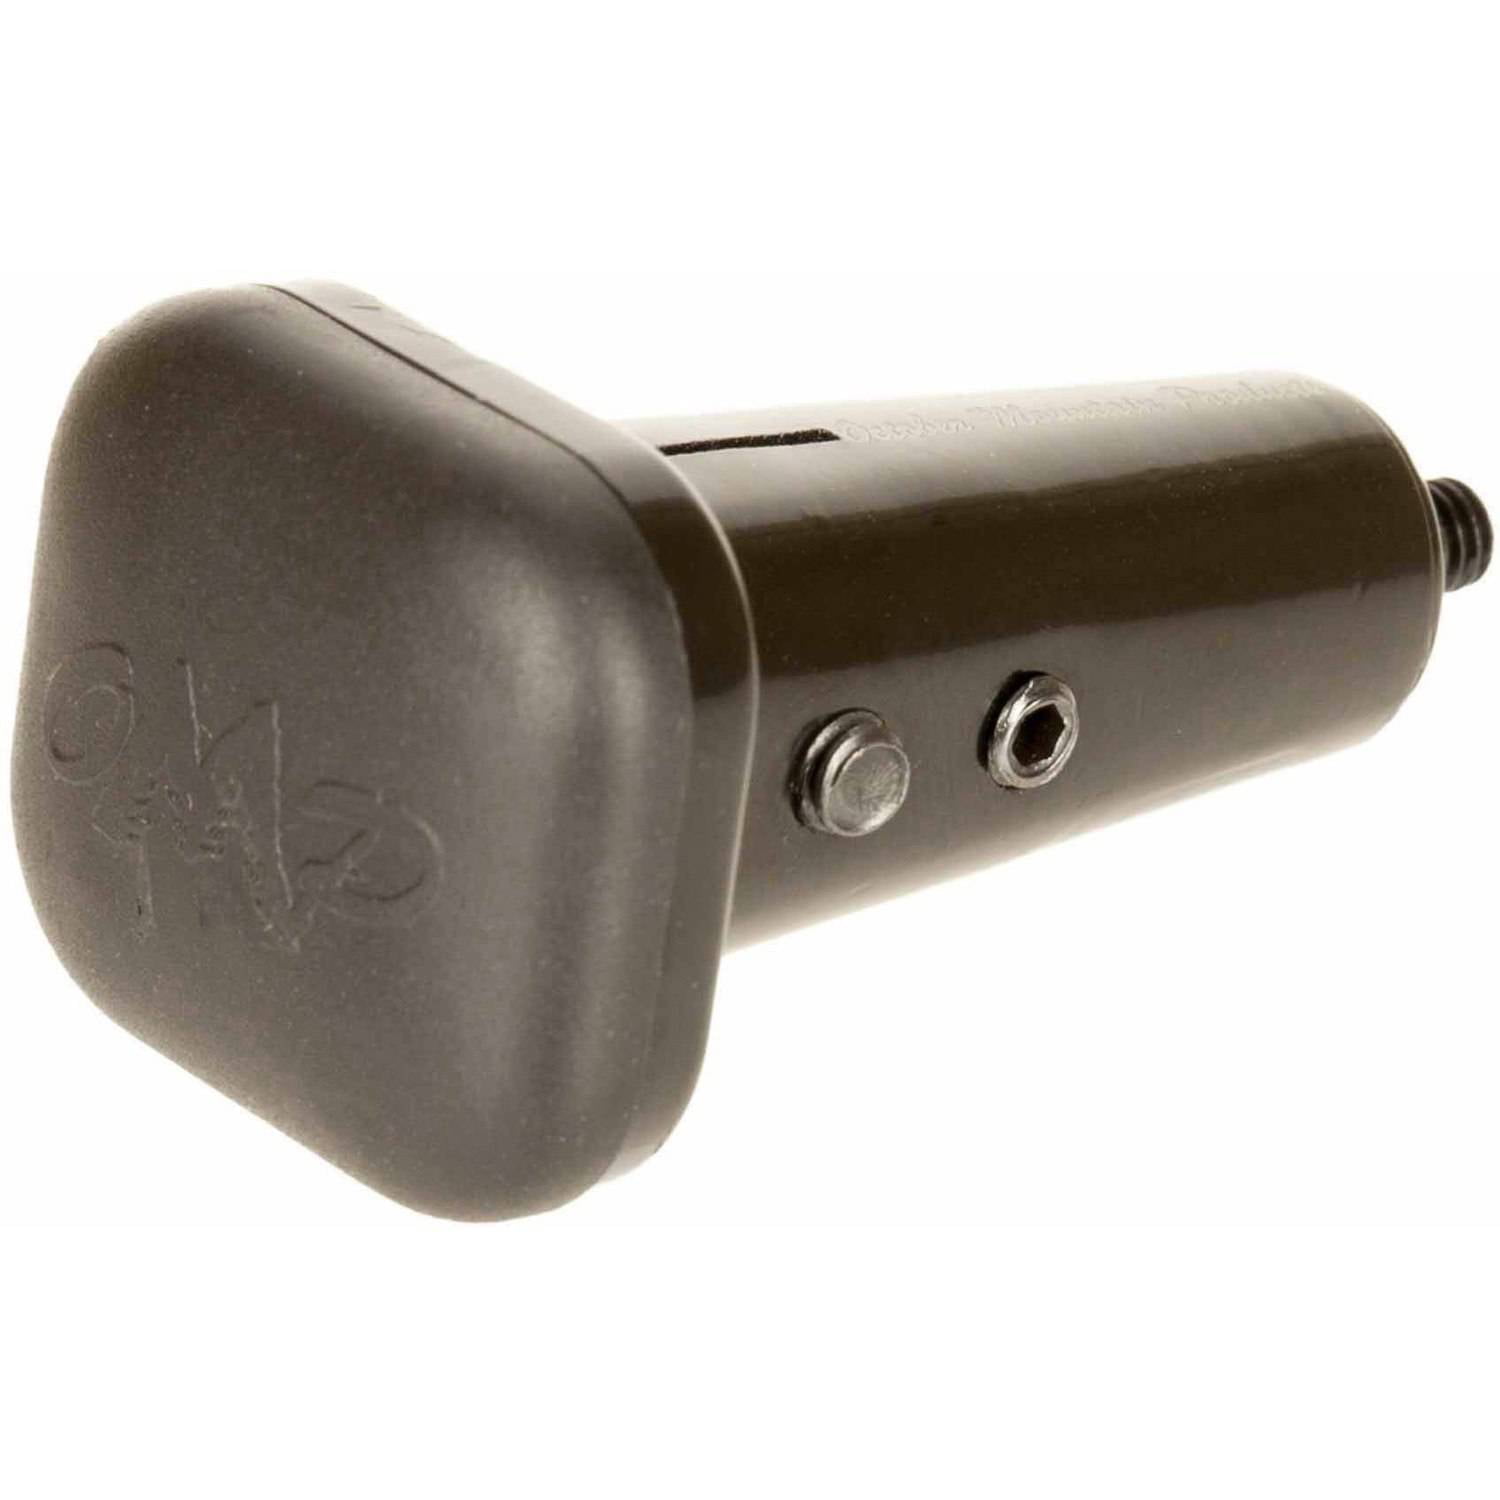 OMP October Mountain XB Crossbow Impact Discharge Head for sale online 